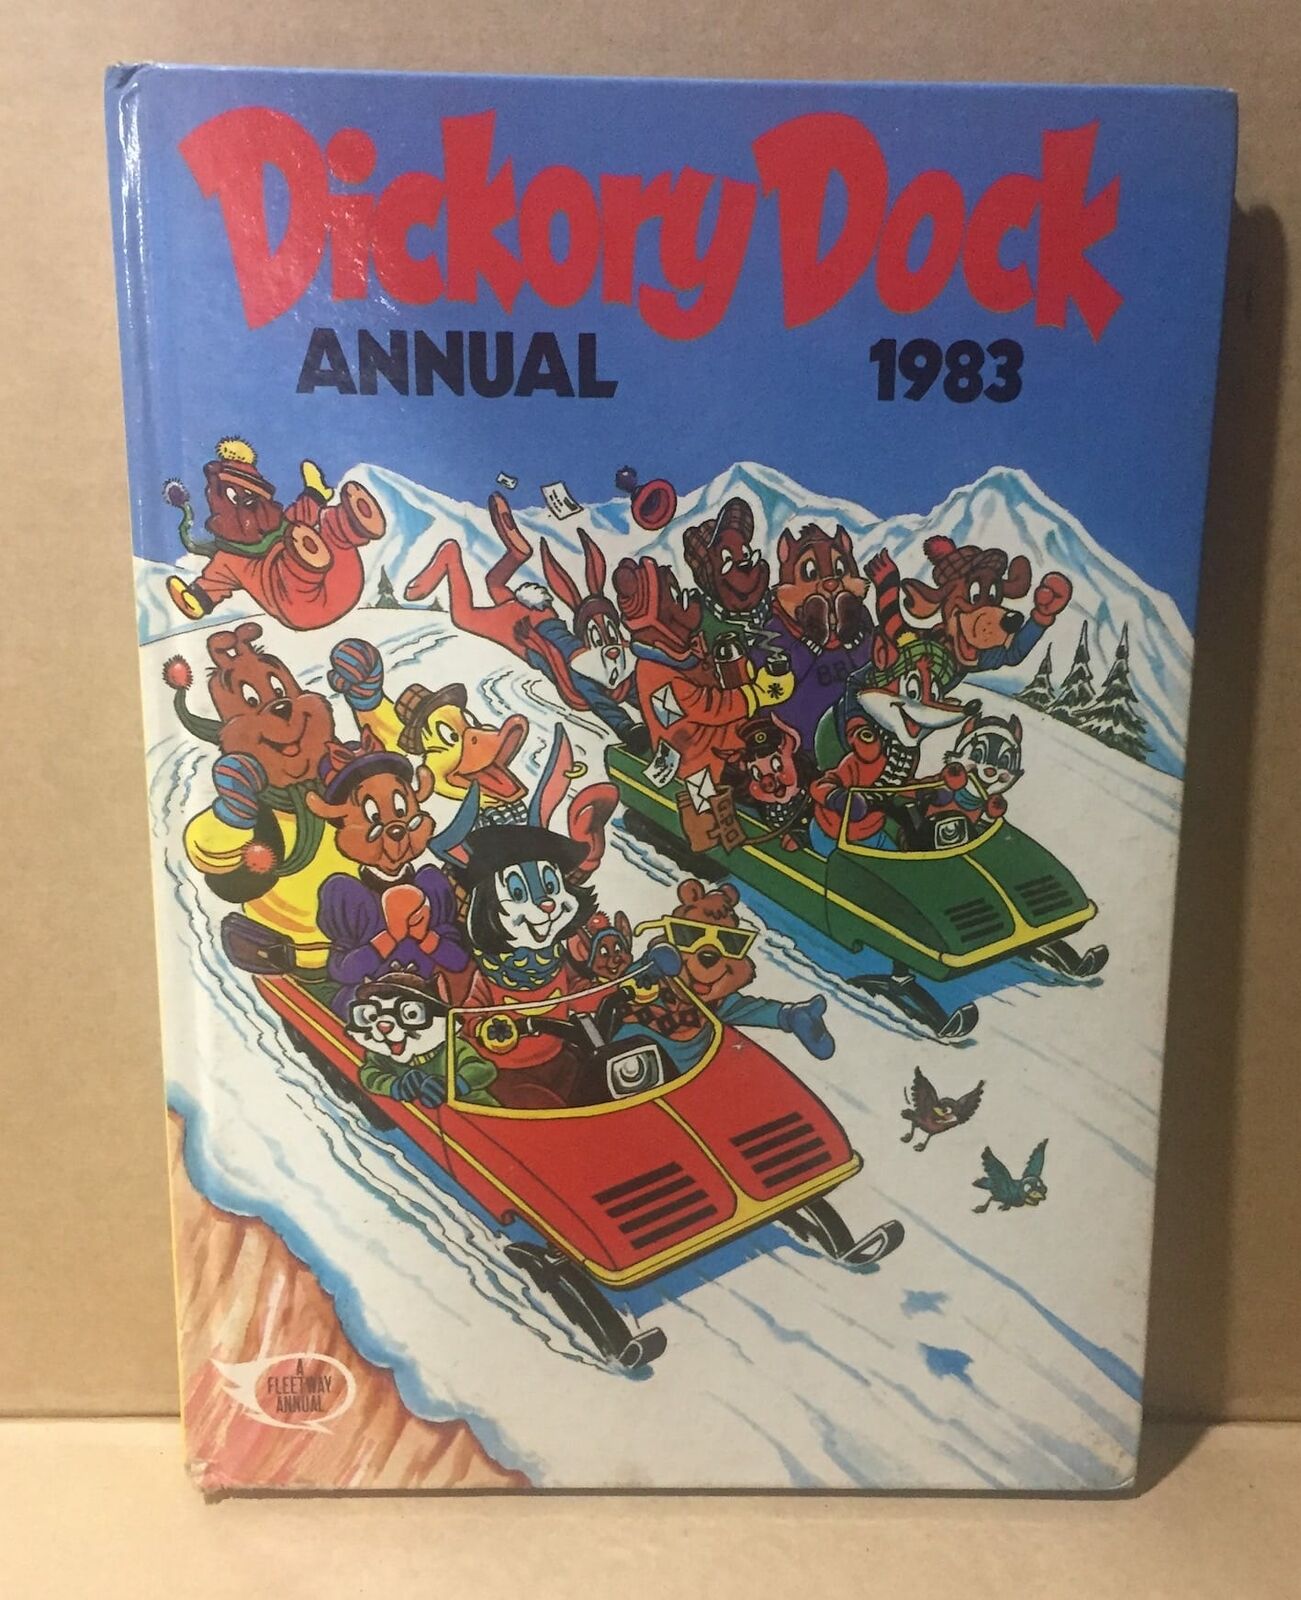 DICKORY DOCK ANNUAL 1983 CHILDREN'S BOOK HARD COVER ANNUAL 1983 vintage